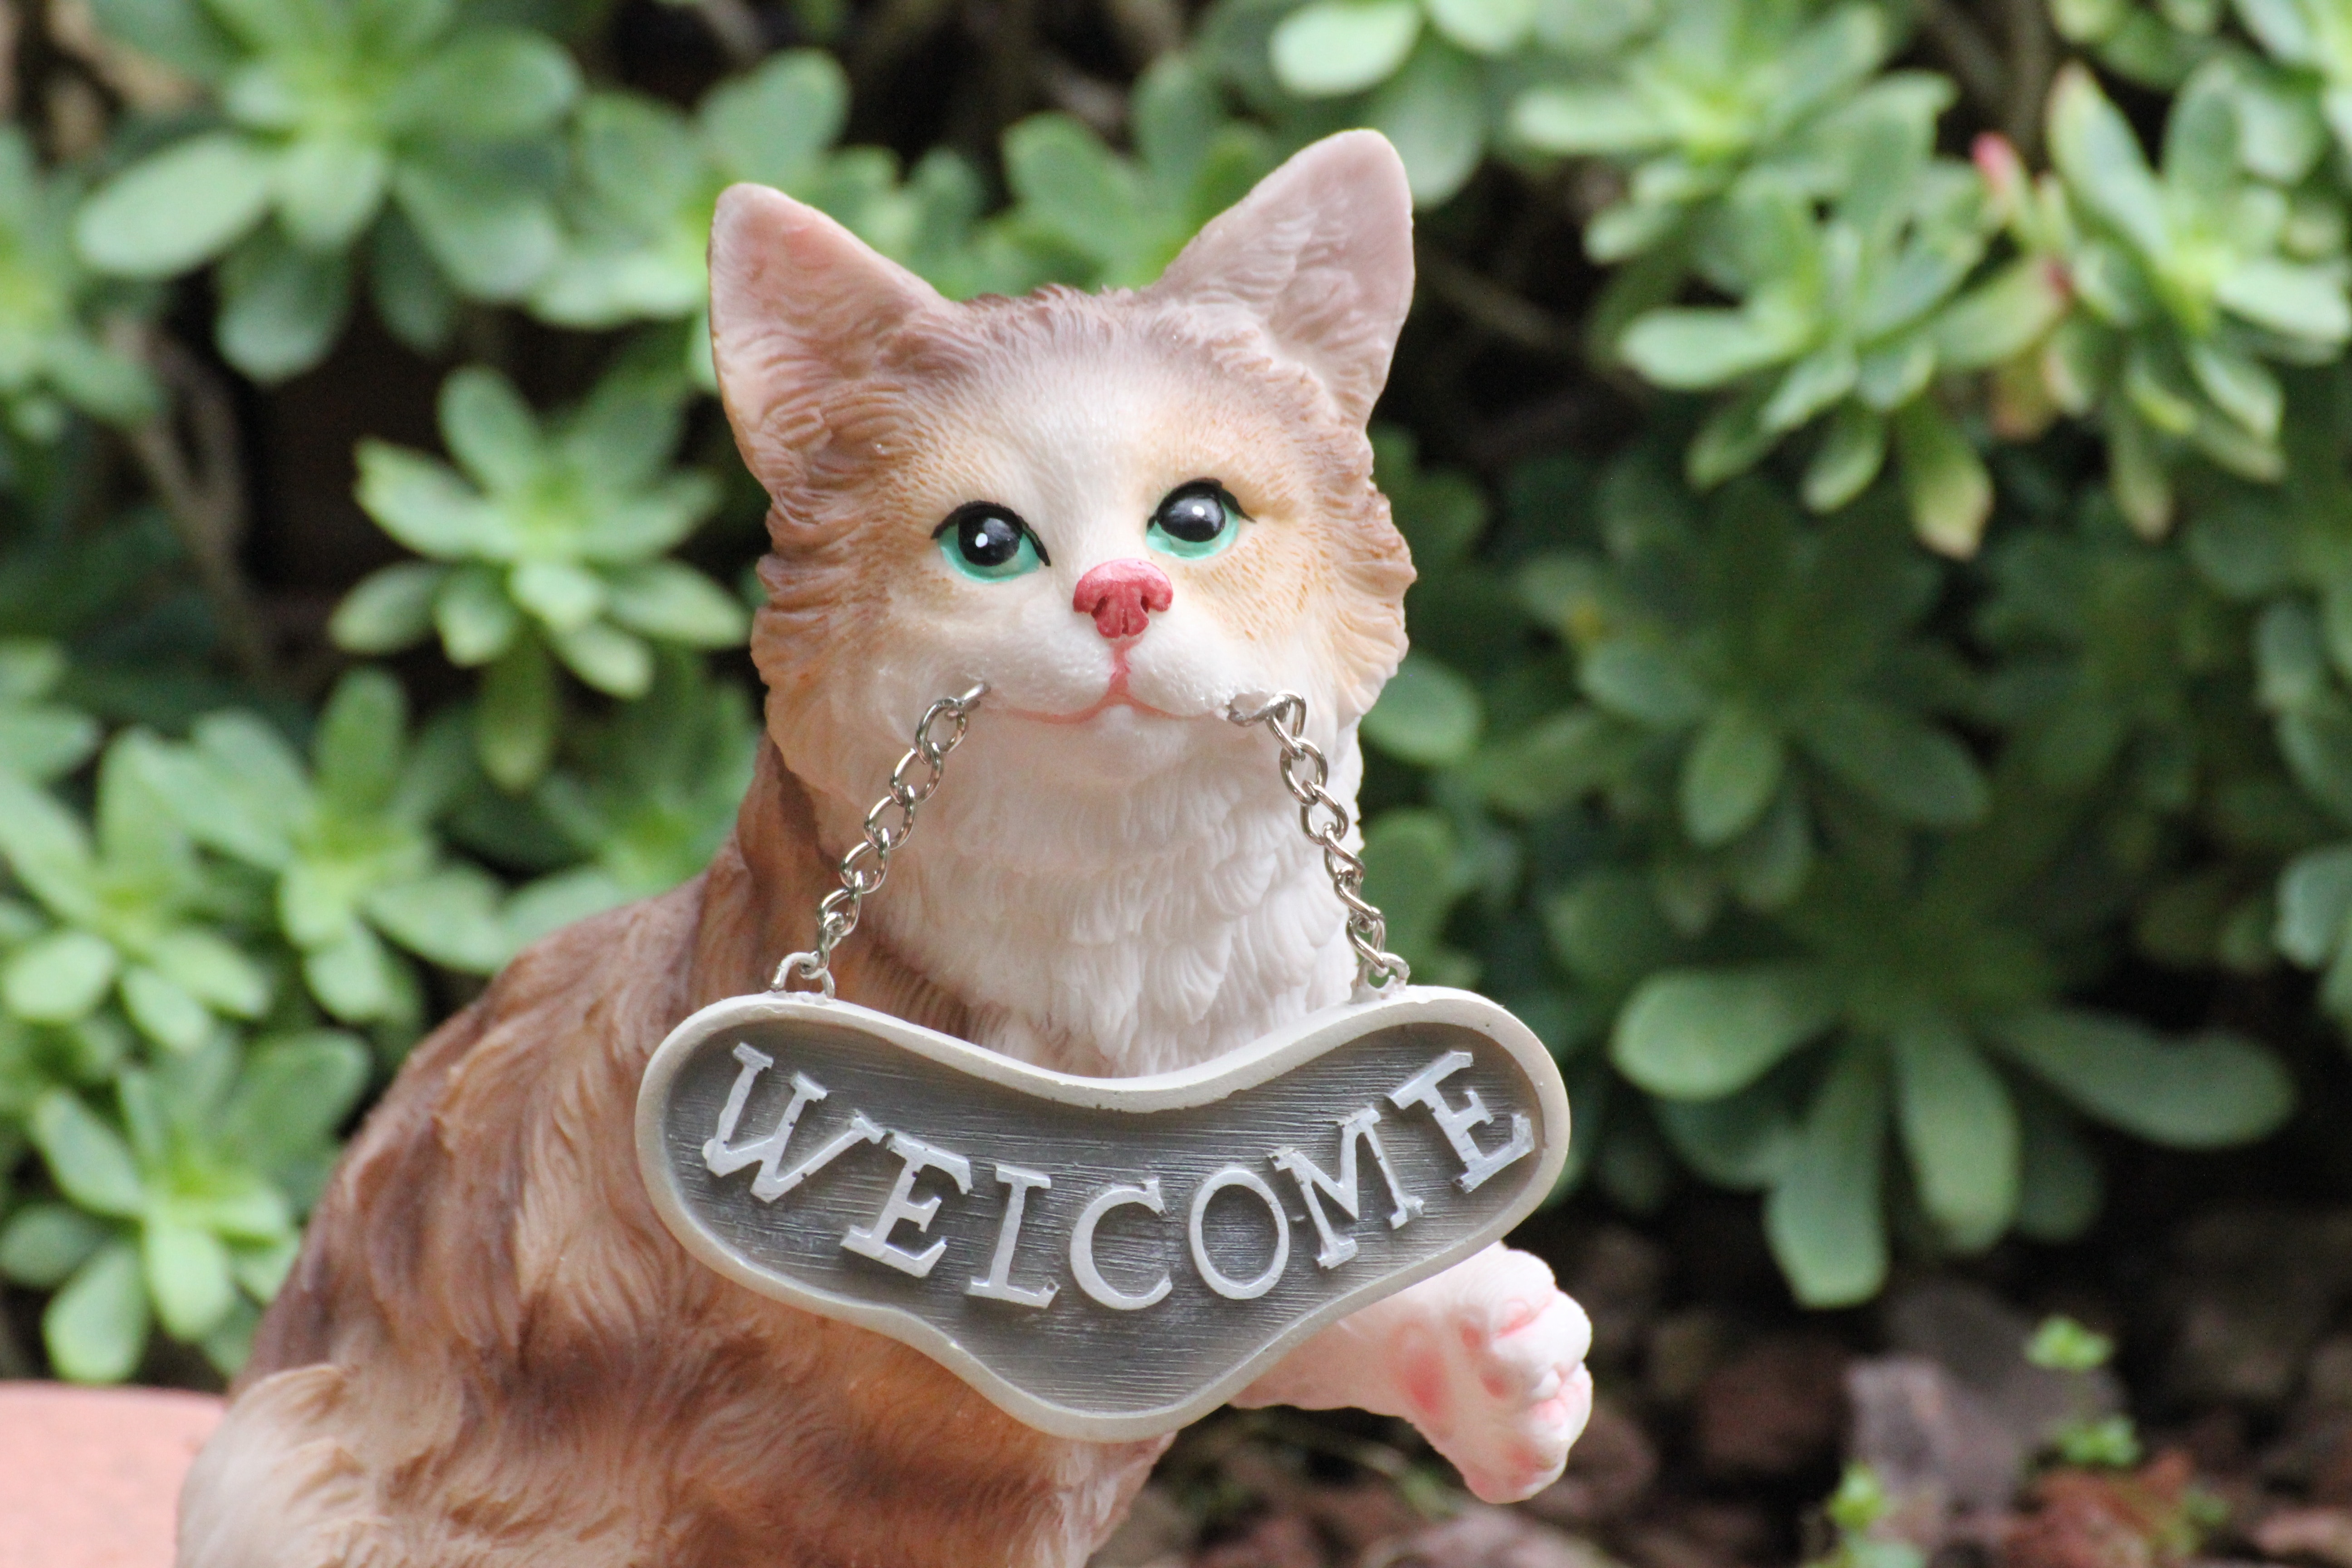 brow cat figurine with welcome signage